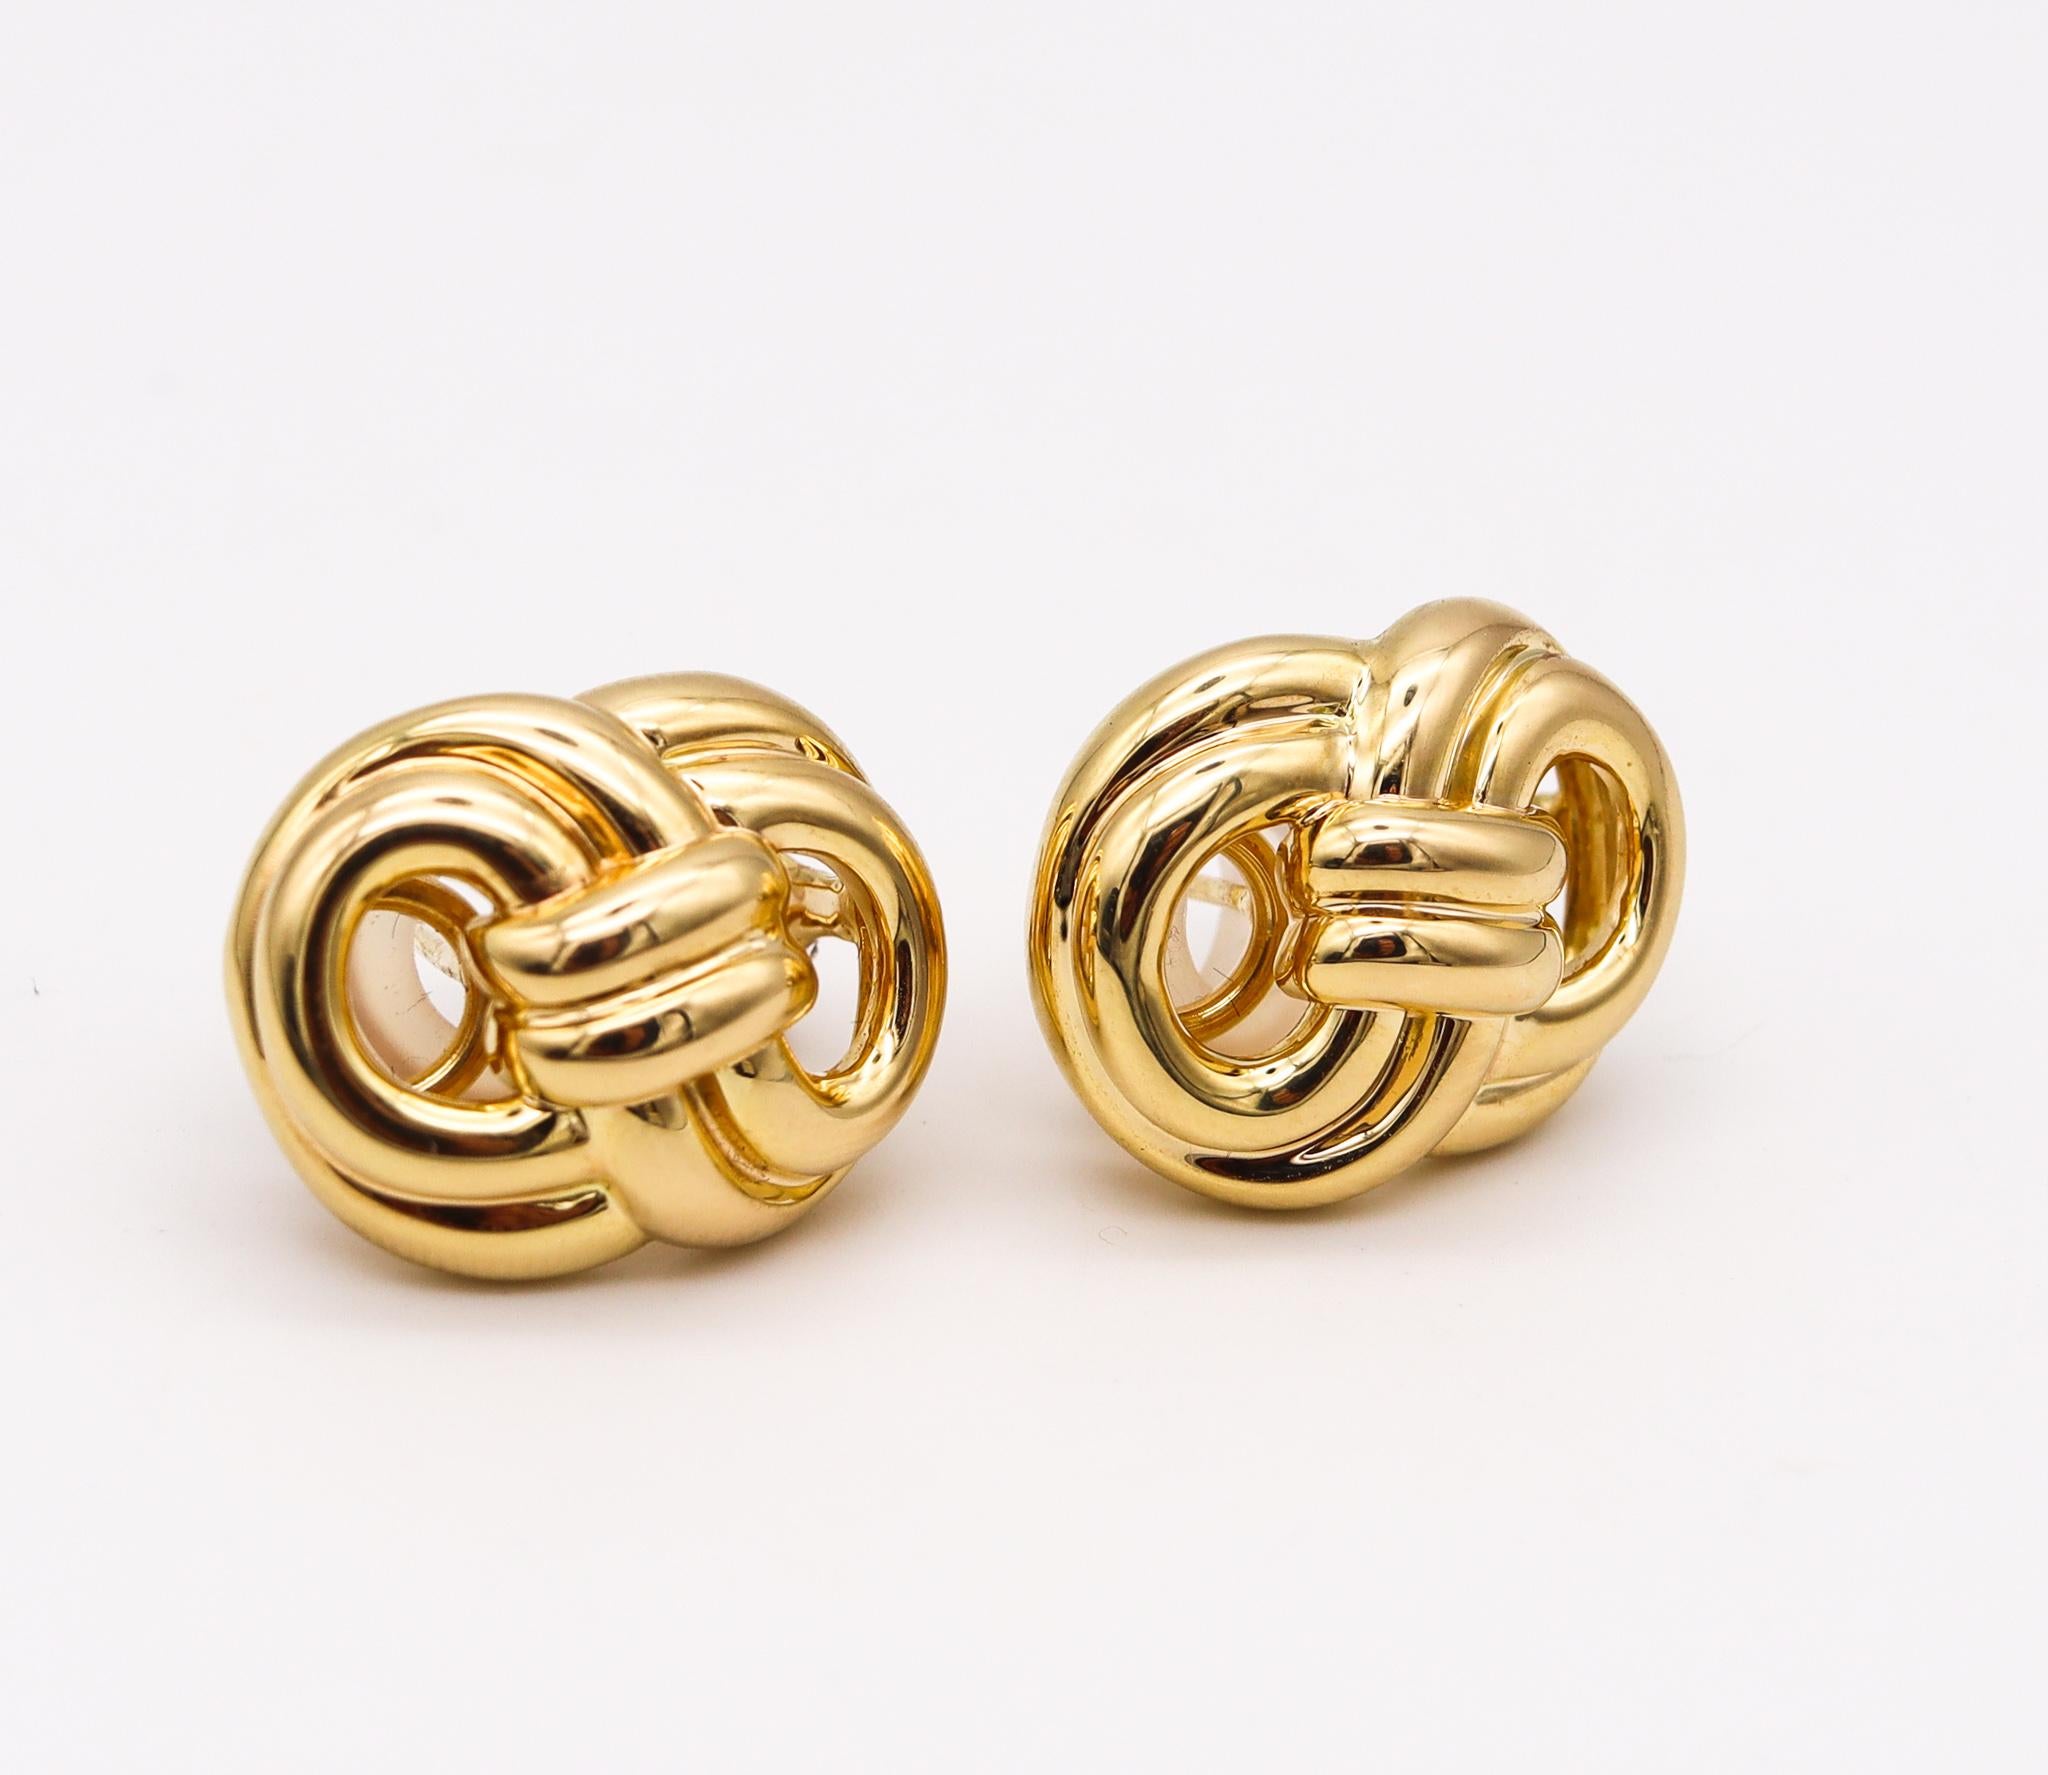 Infinity knots clip-earrings designed by Verdura.

A classic iconic pair of clips-on earrings, created in Milan Italy by the renowned jewelry house of Verdura. These infinity knots earrings has been crafted in solid yellow gold of 18 karats, with